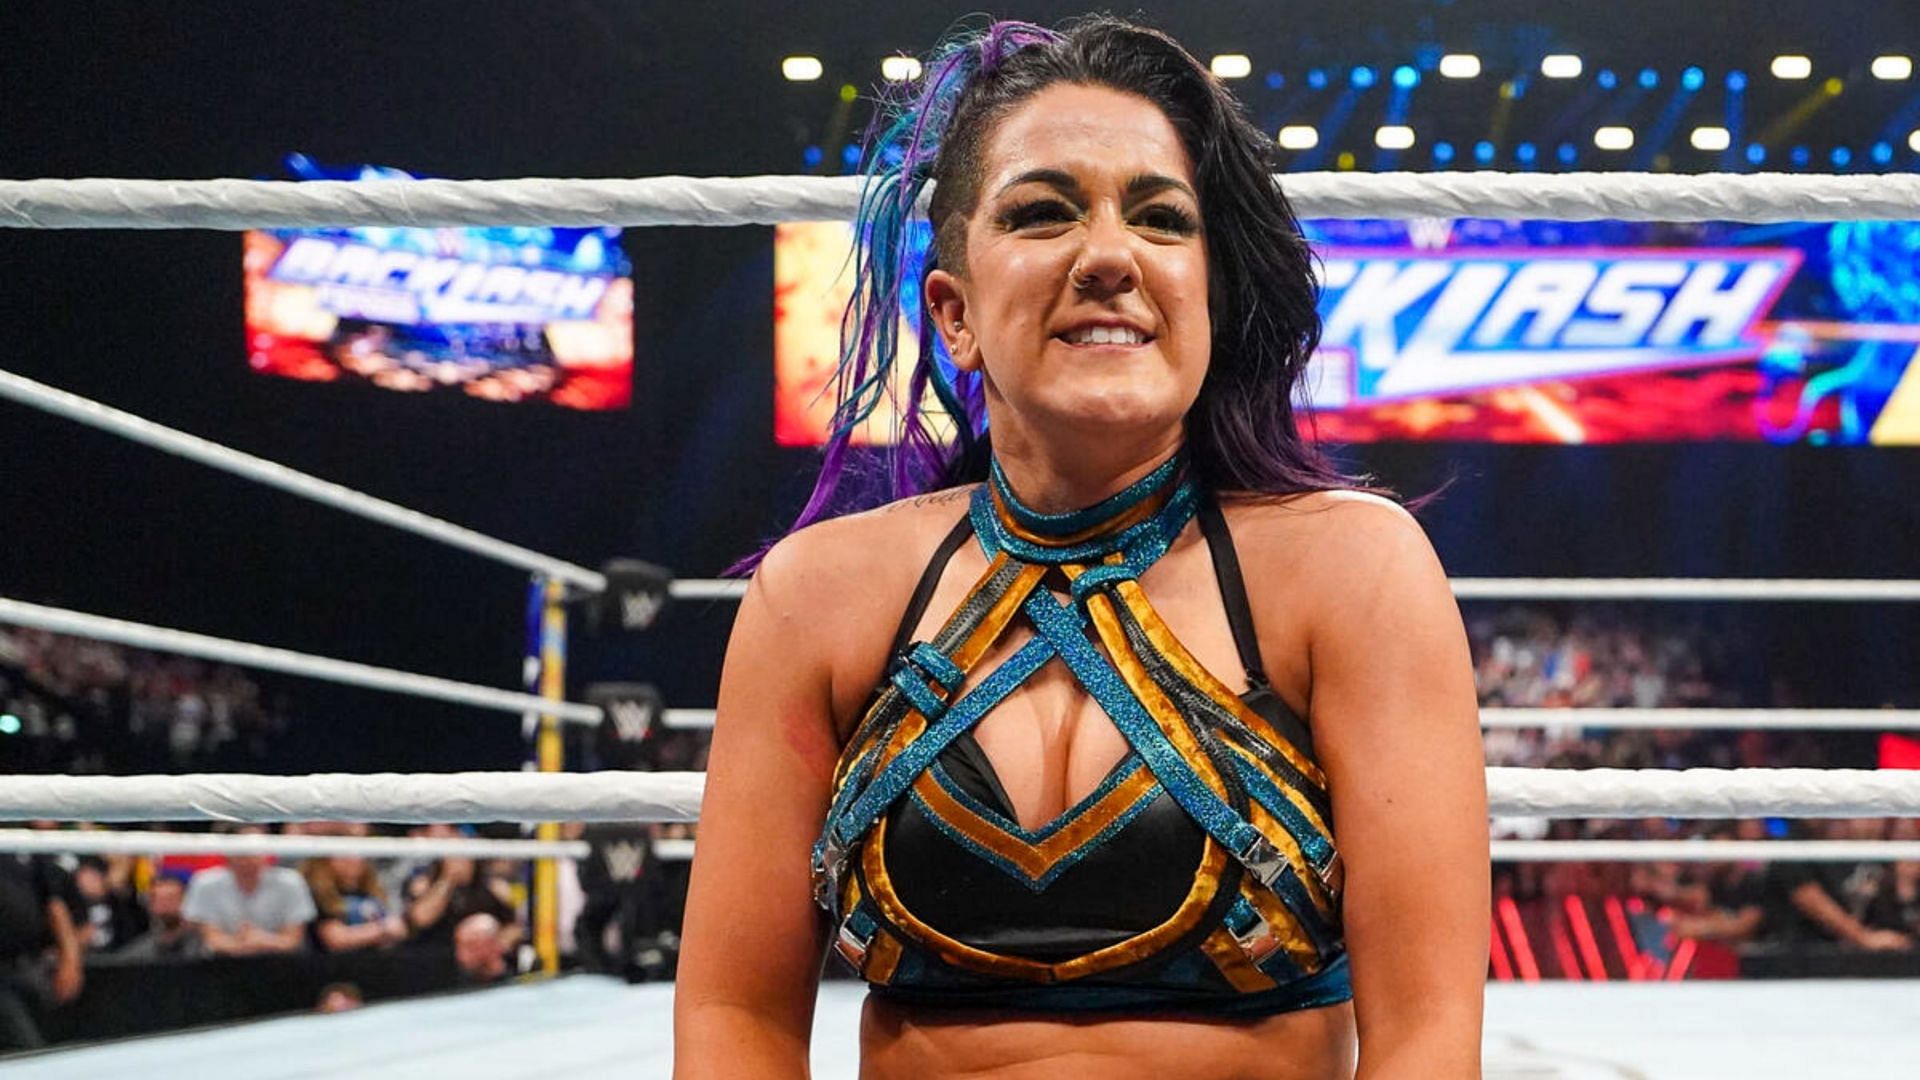 Bayley successfully defended her WWE Women